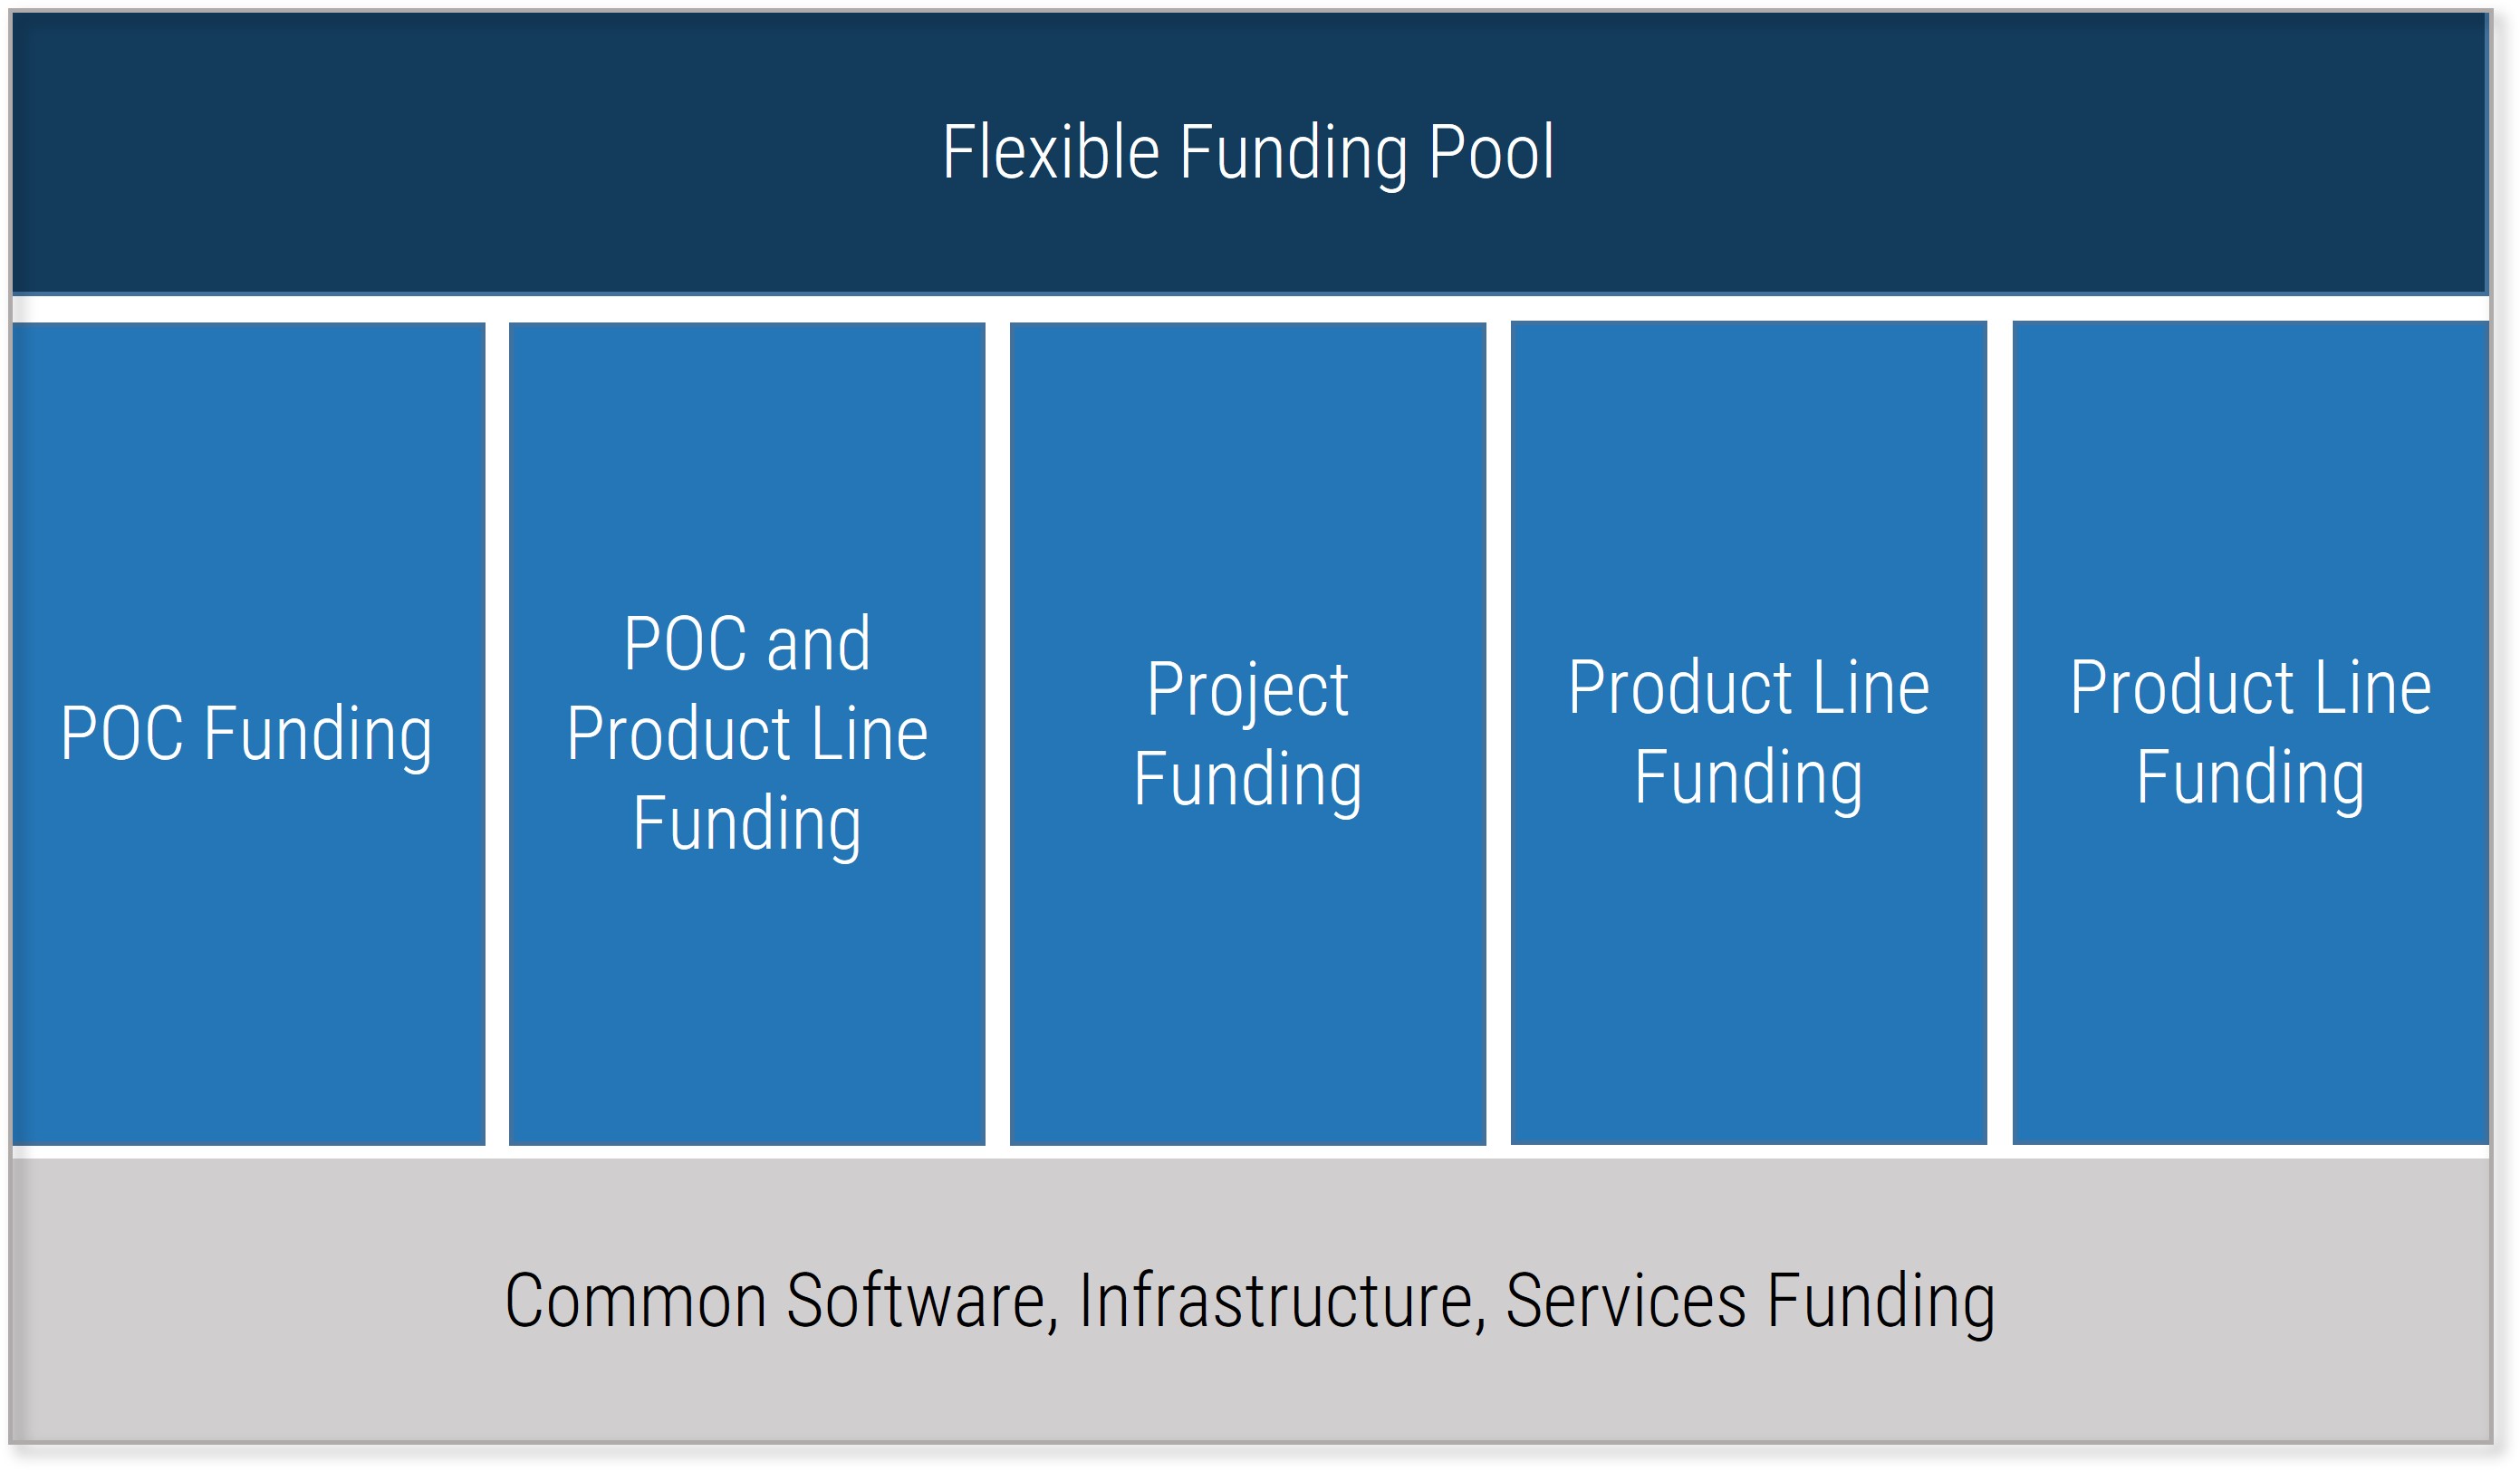 An example of the lean enterprise funding model is shown.